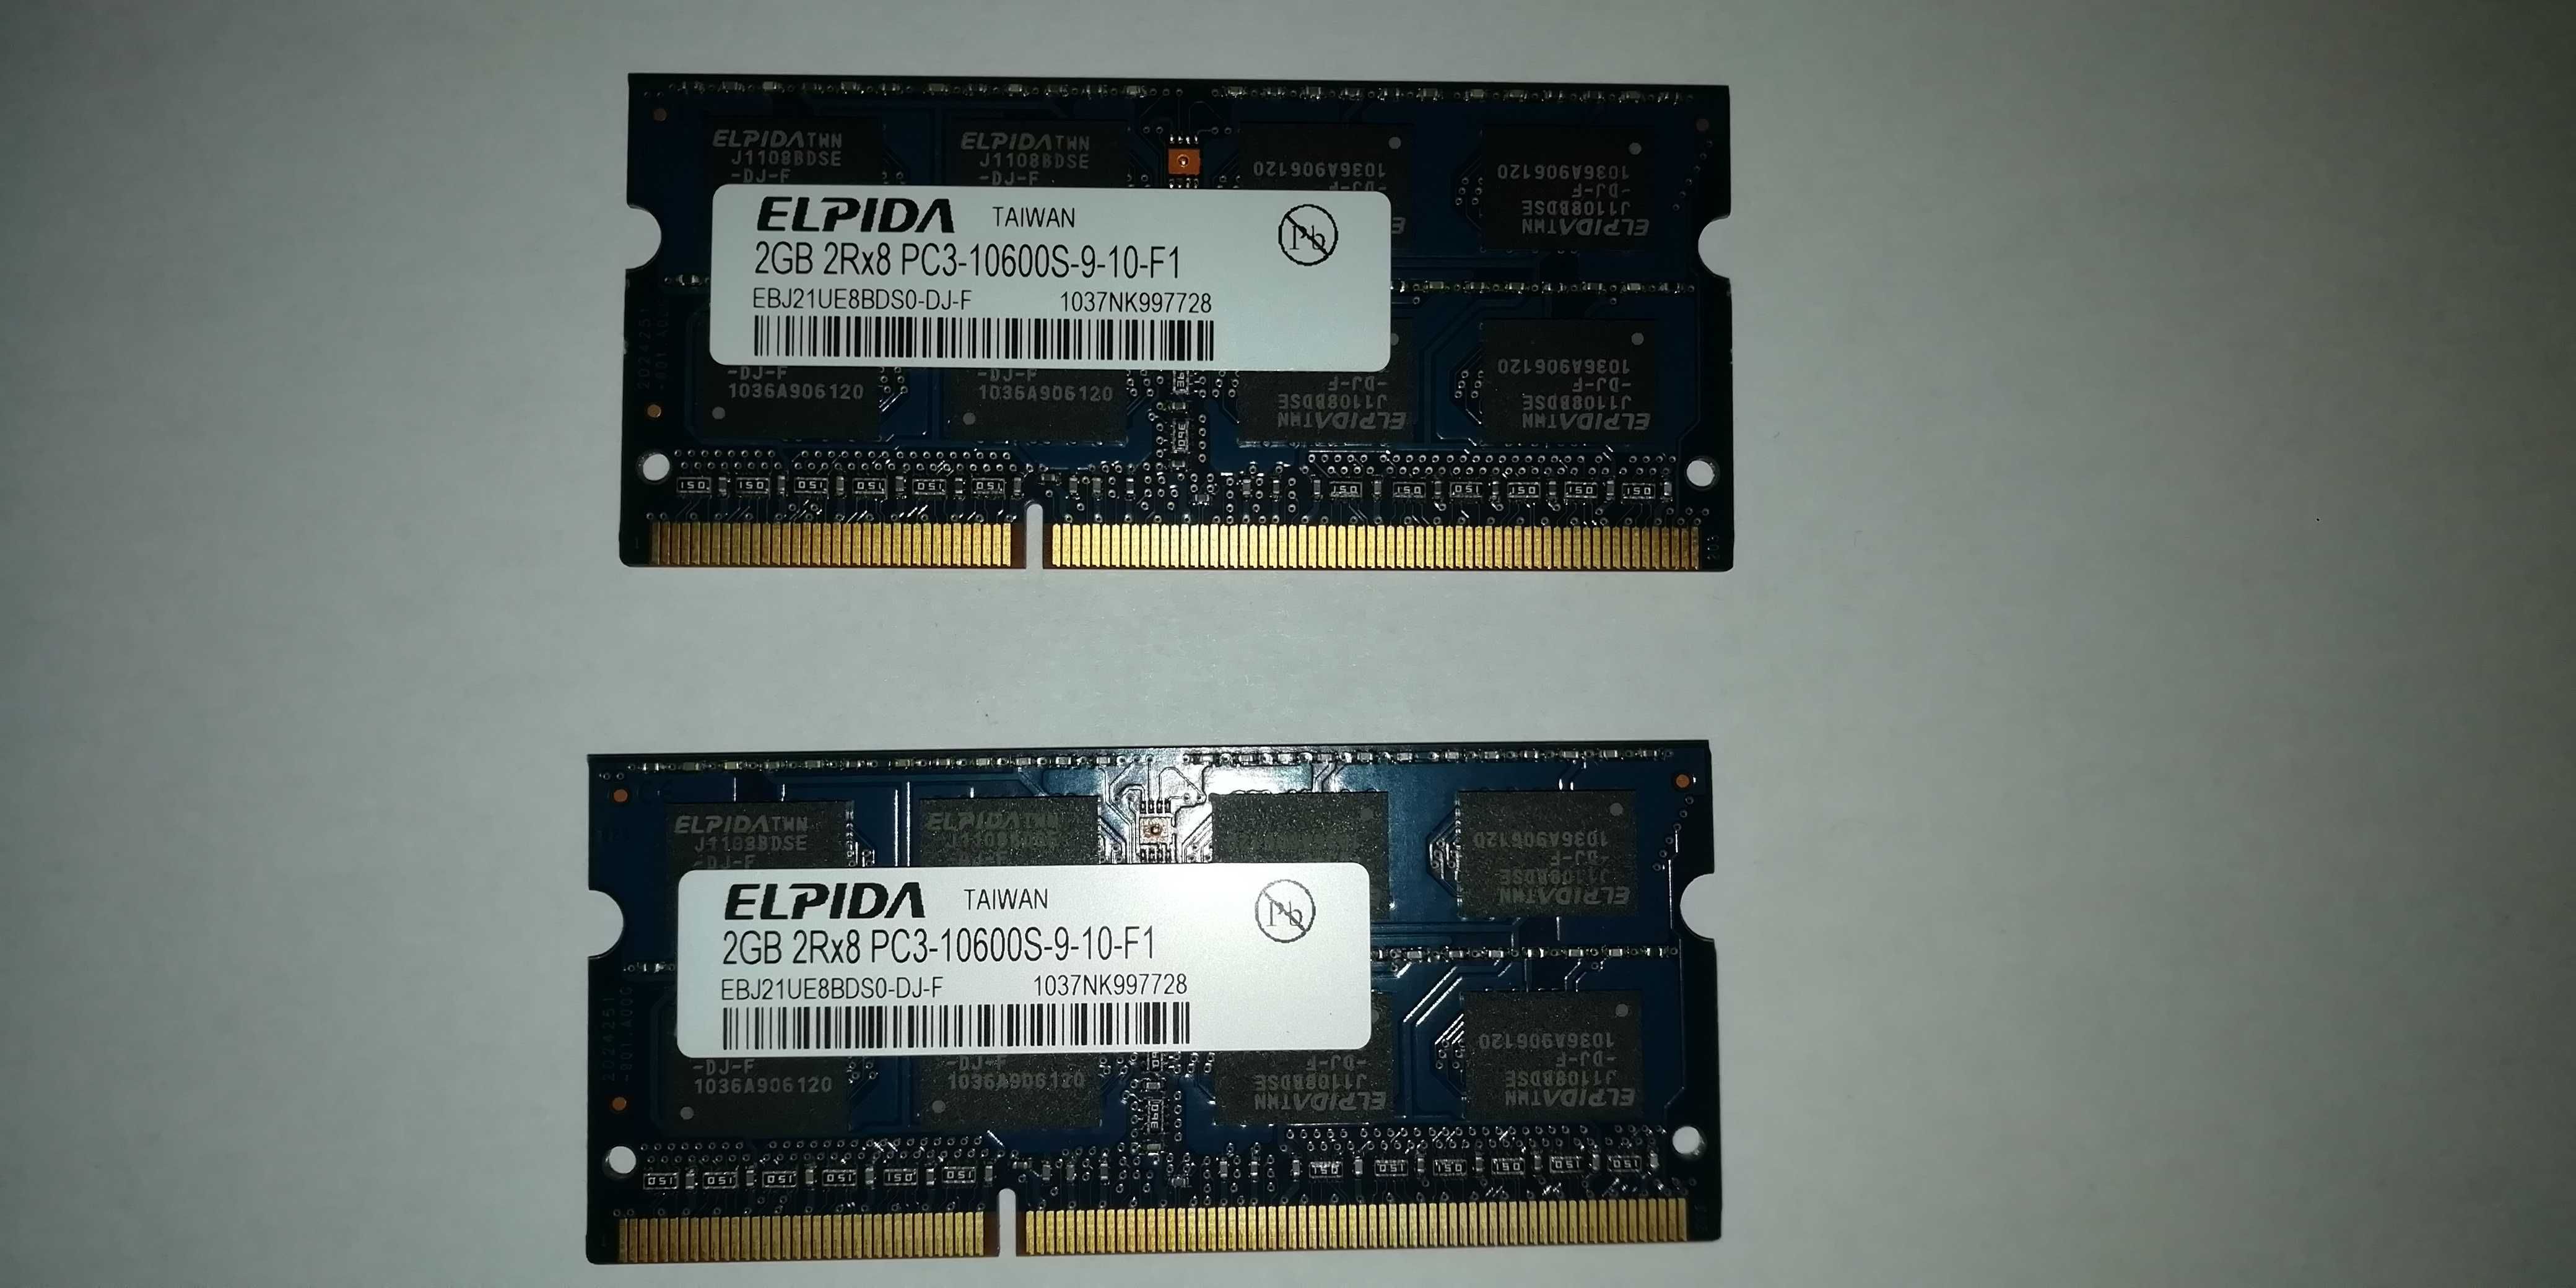 DDR 3 1066mhz / PC3 - 10600S-9